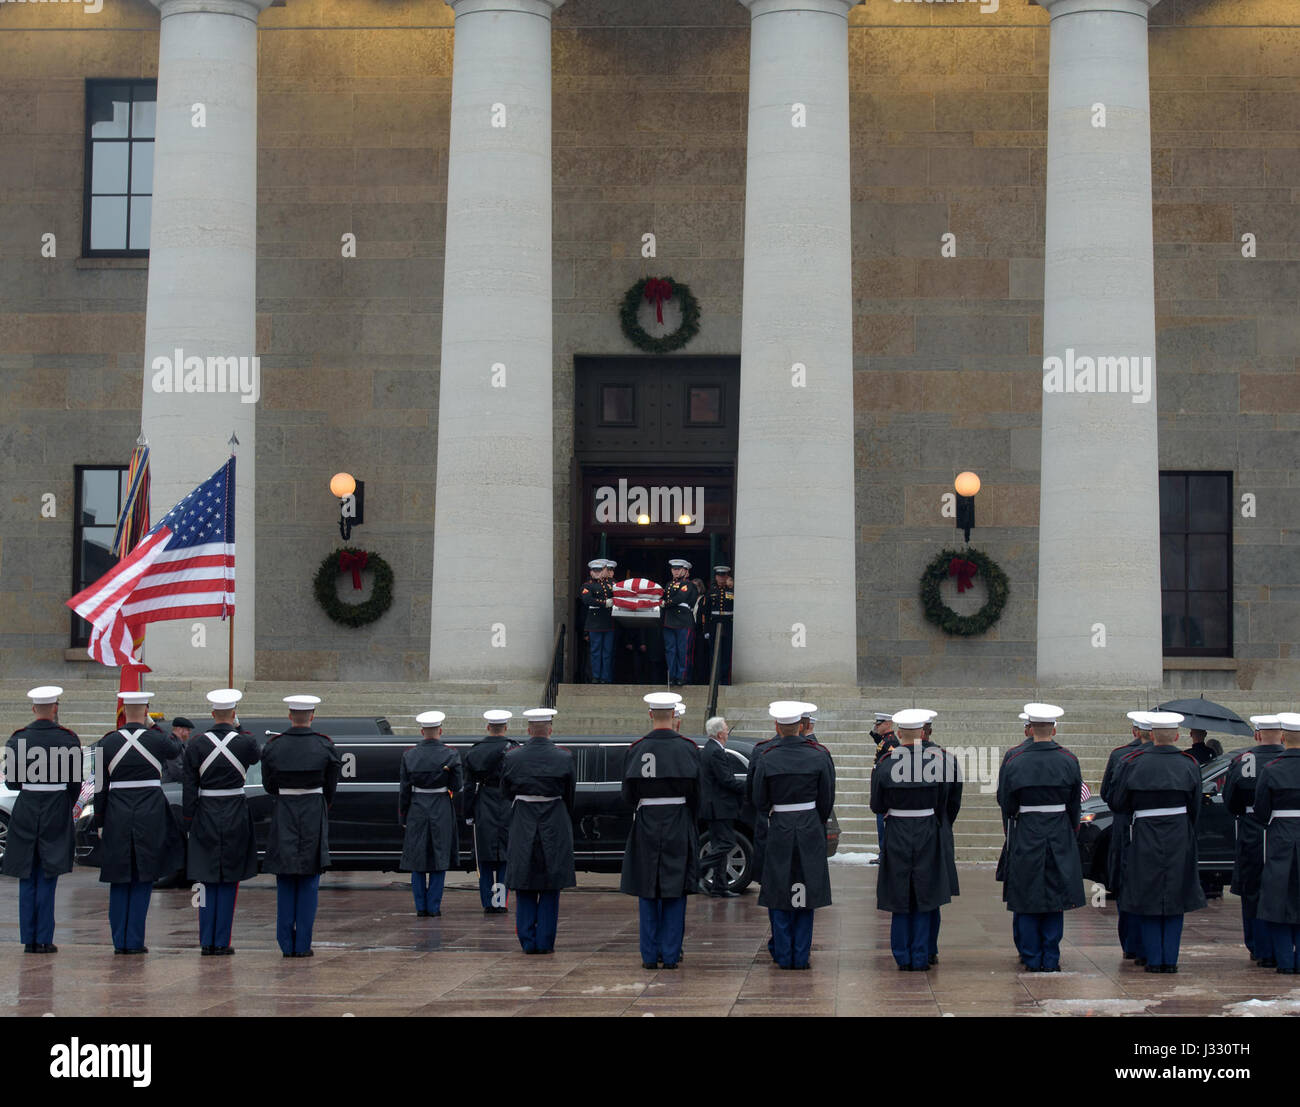 Former astronaut and U.S. Senator John Glenn's funeral procession is lead out of the Ohio Statehouse in Columbus, Ohio, Saturday, December 17, 2016. Stock Photo